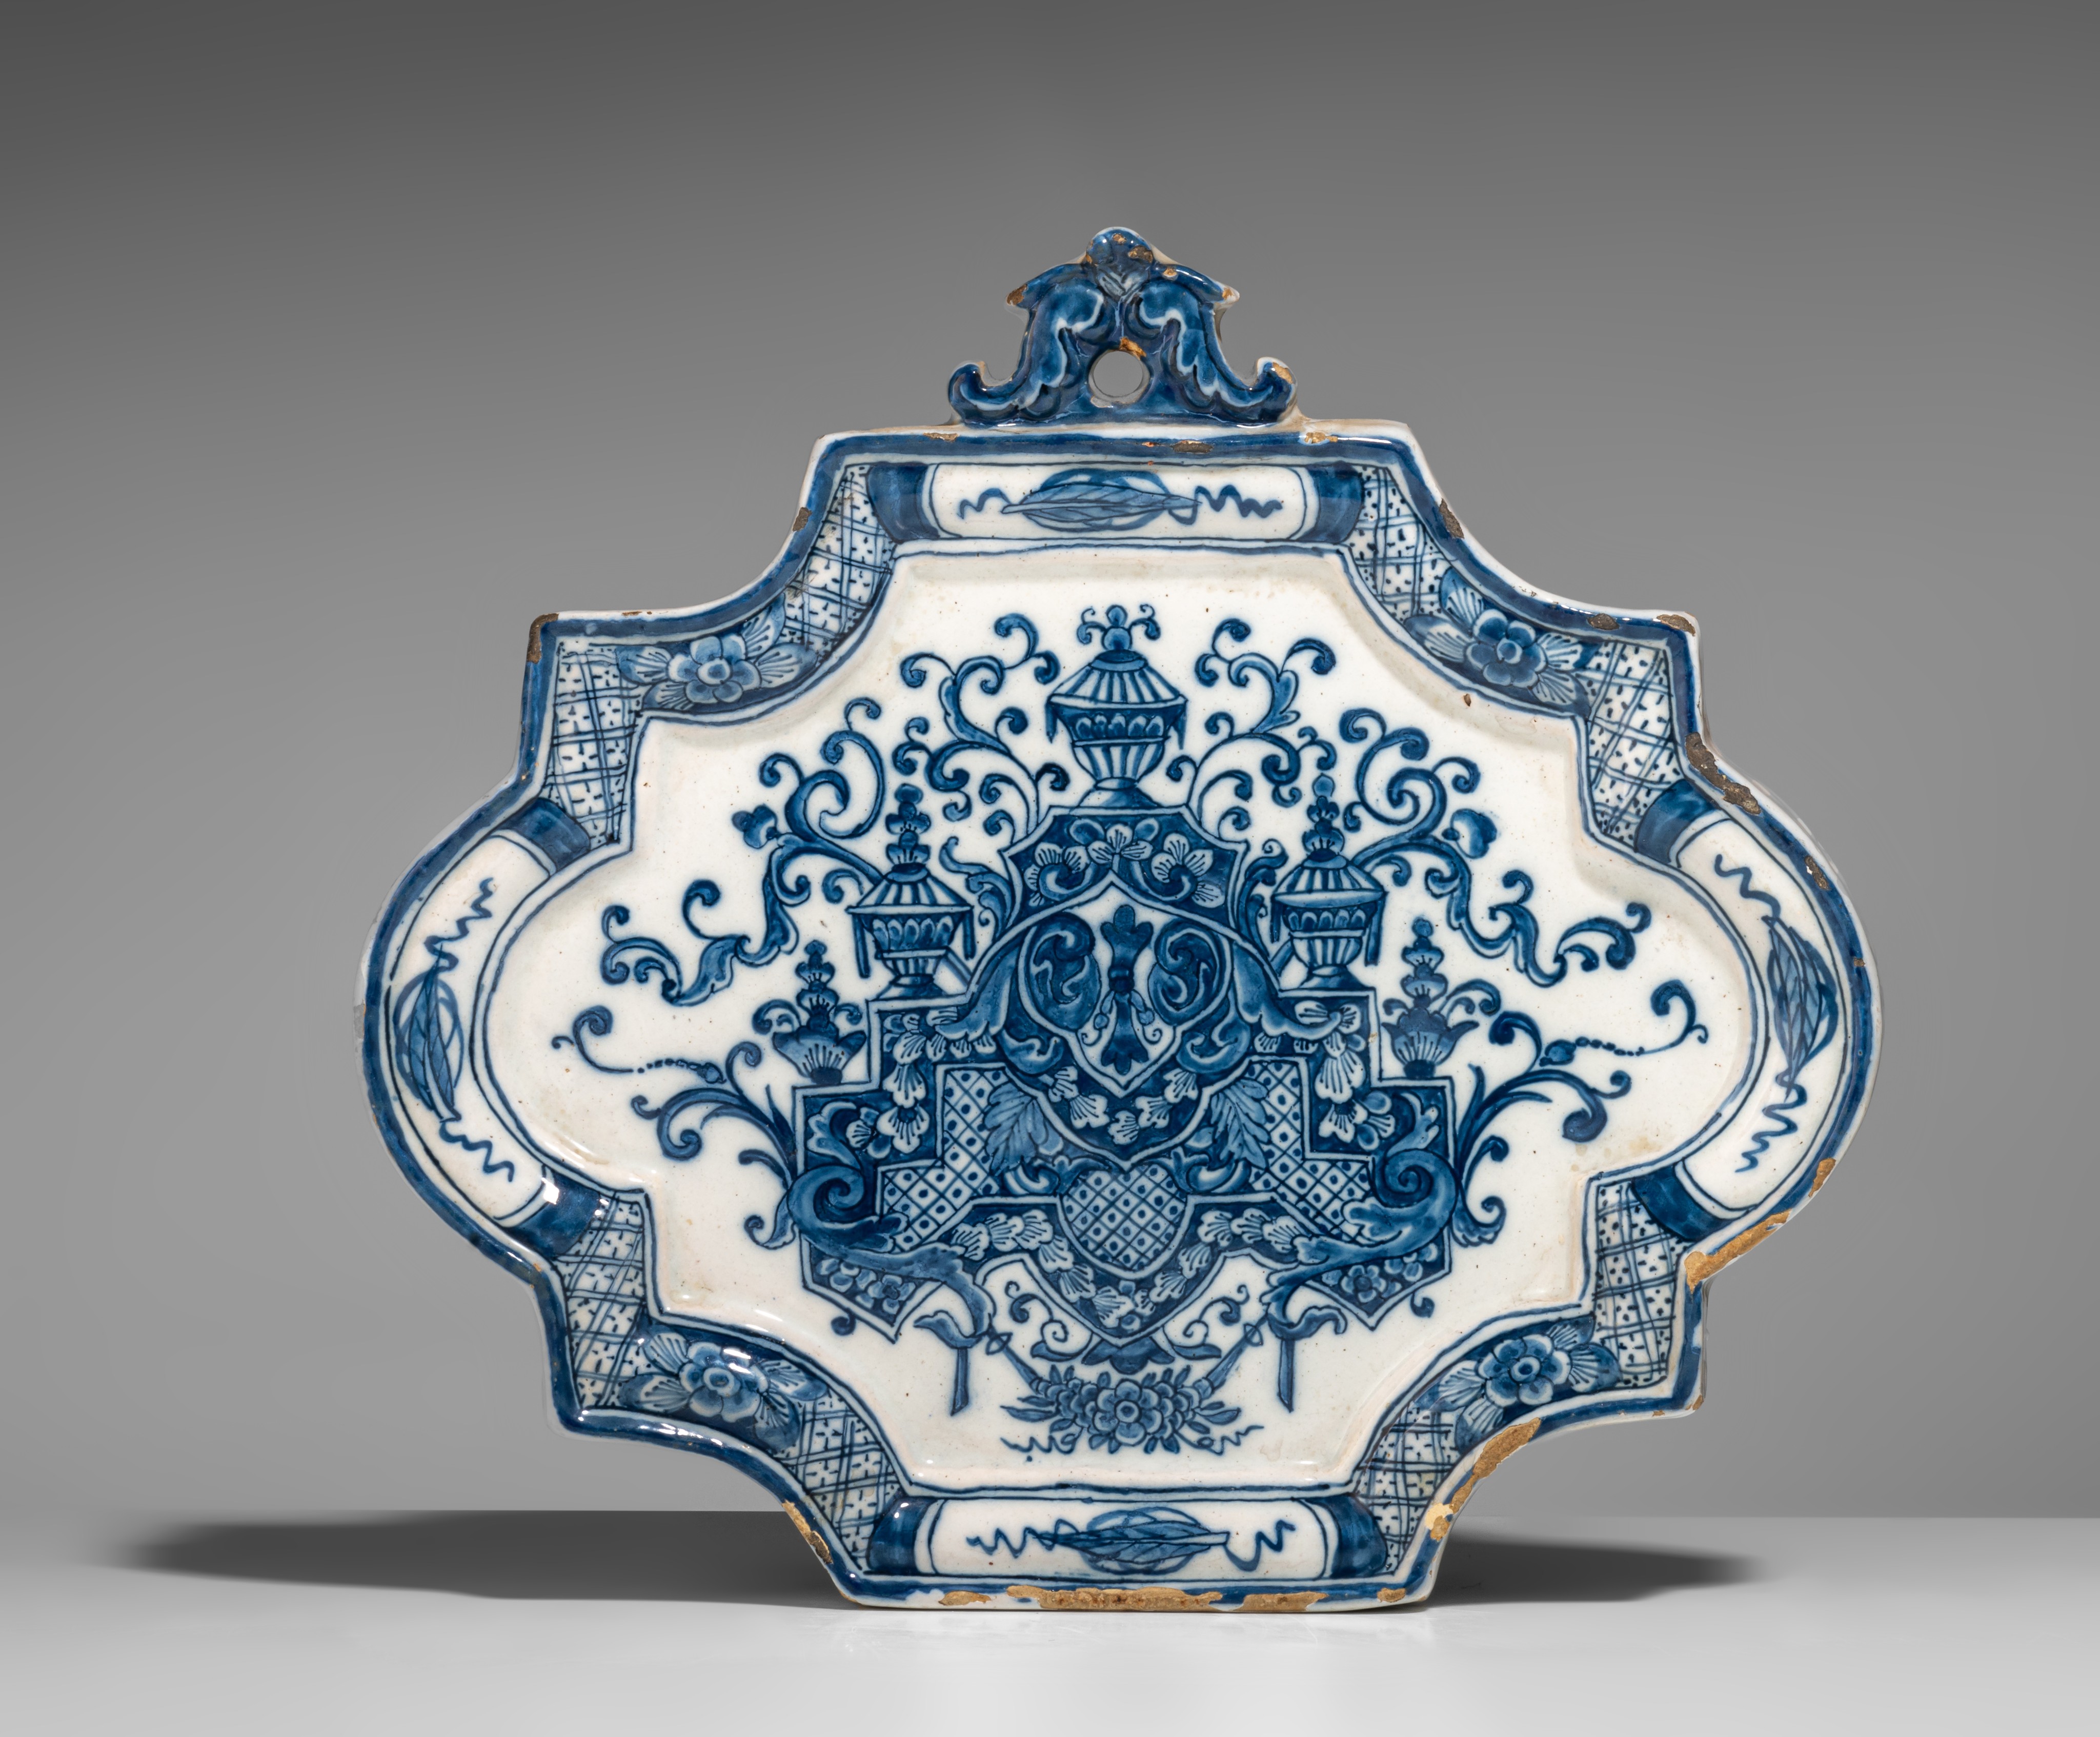 An 18thC Dutch Delft blue and white decorated plaque with a central lambrequin, H 22 cm - Image 2 of 3